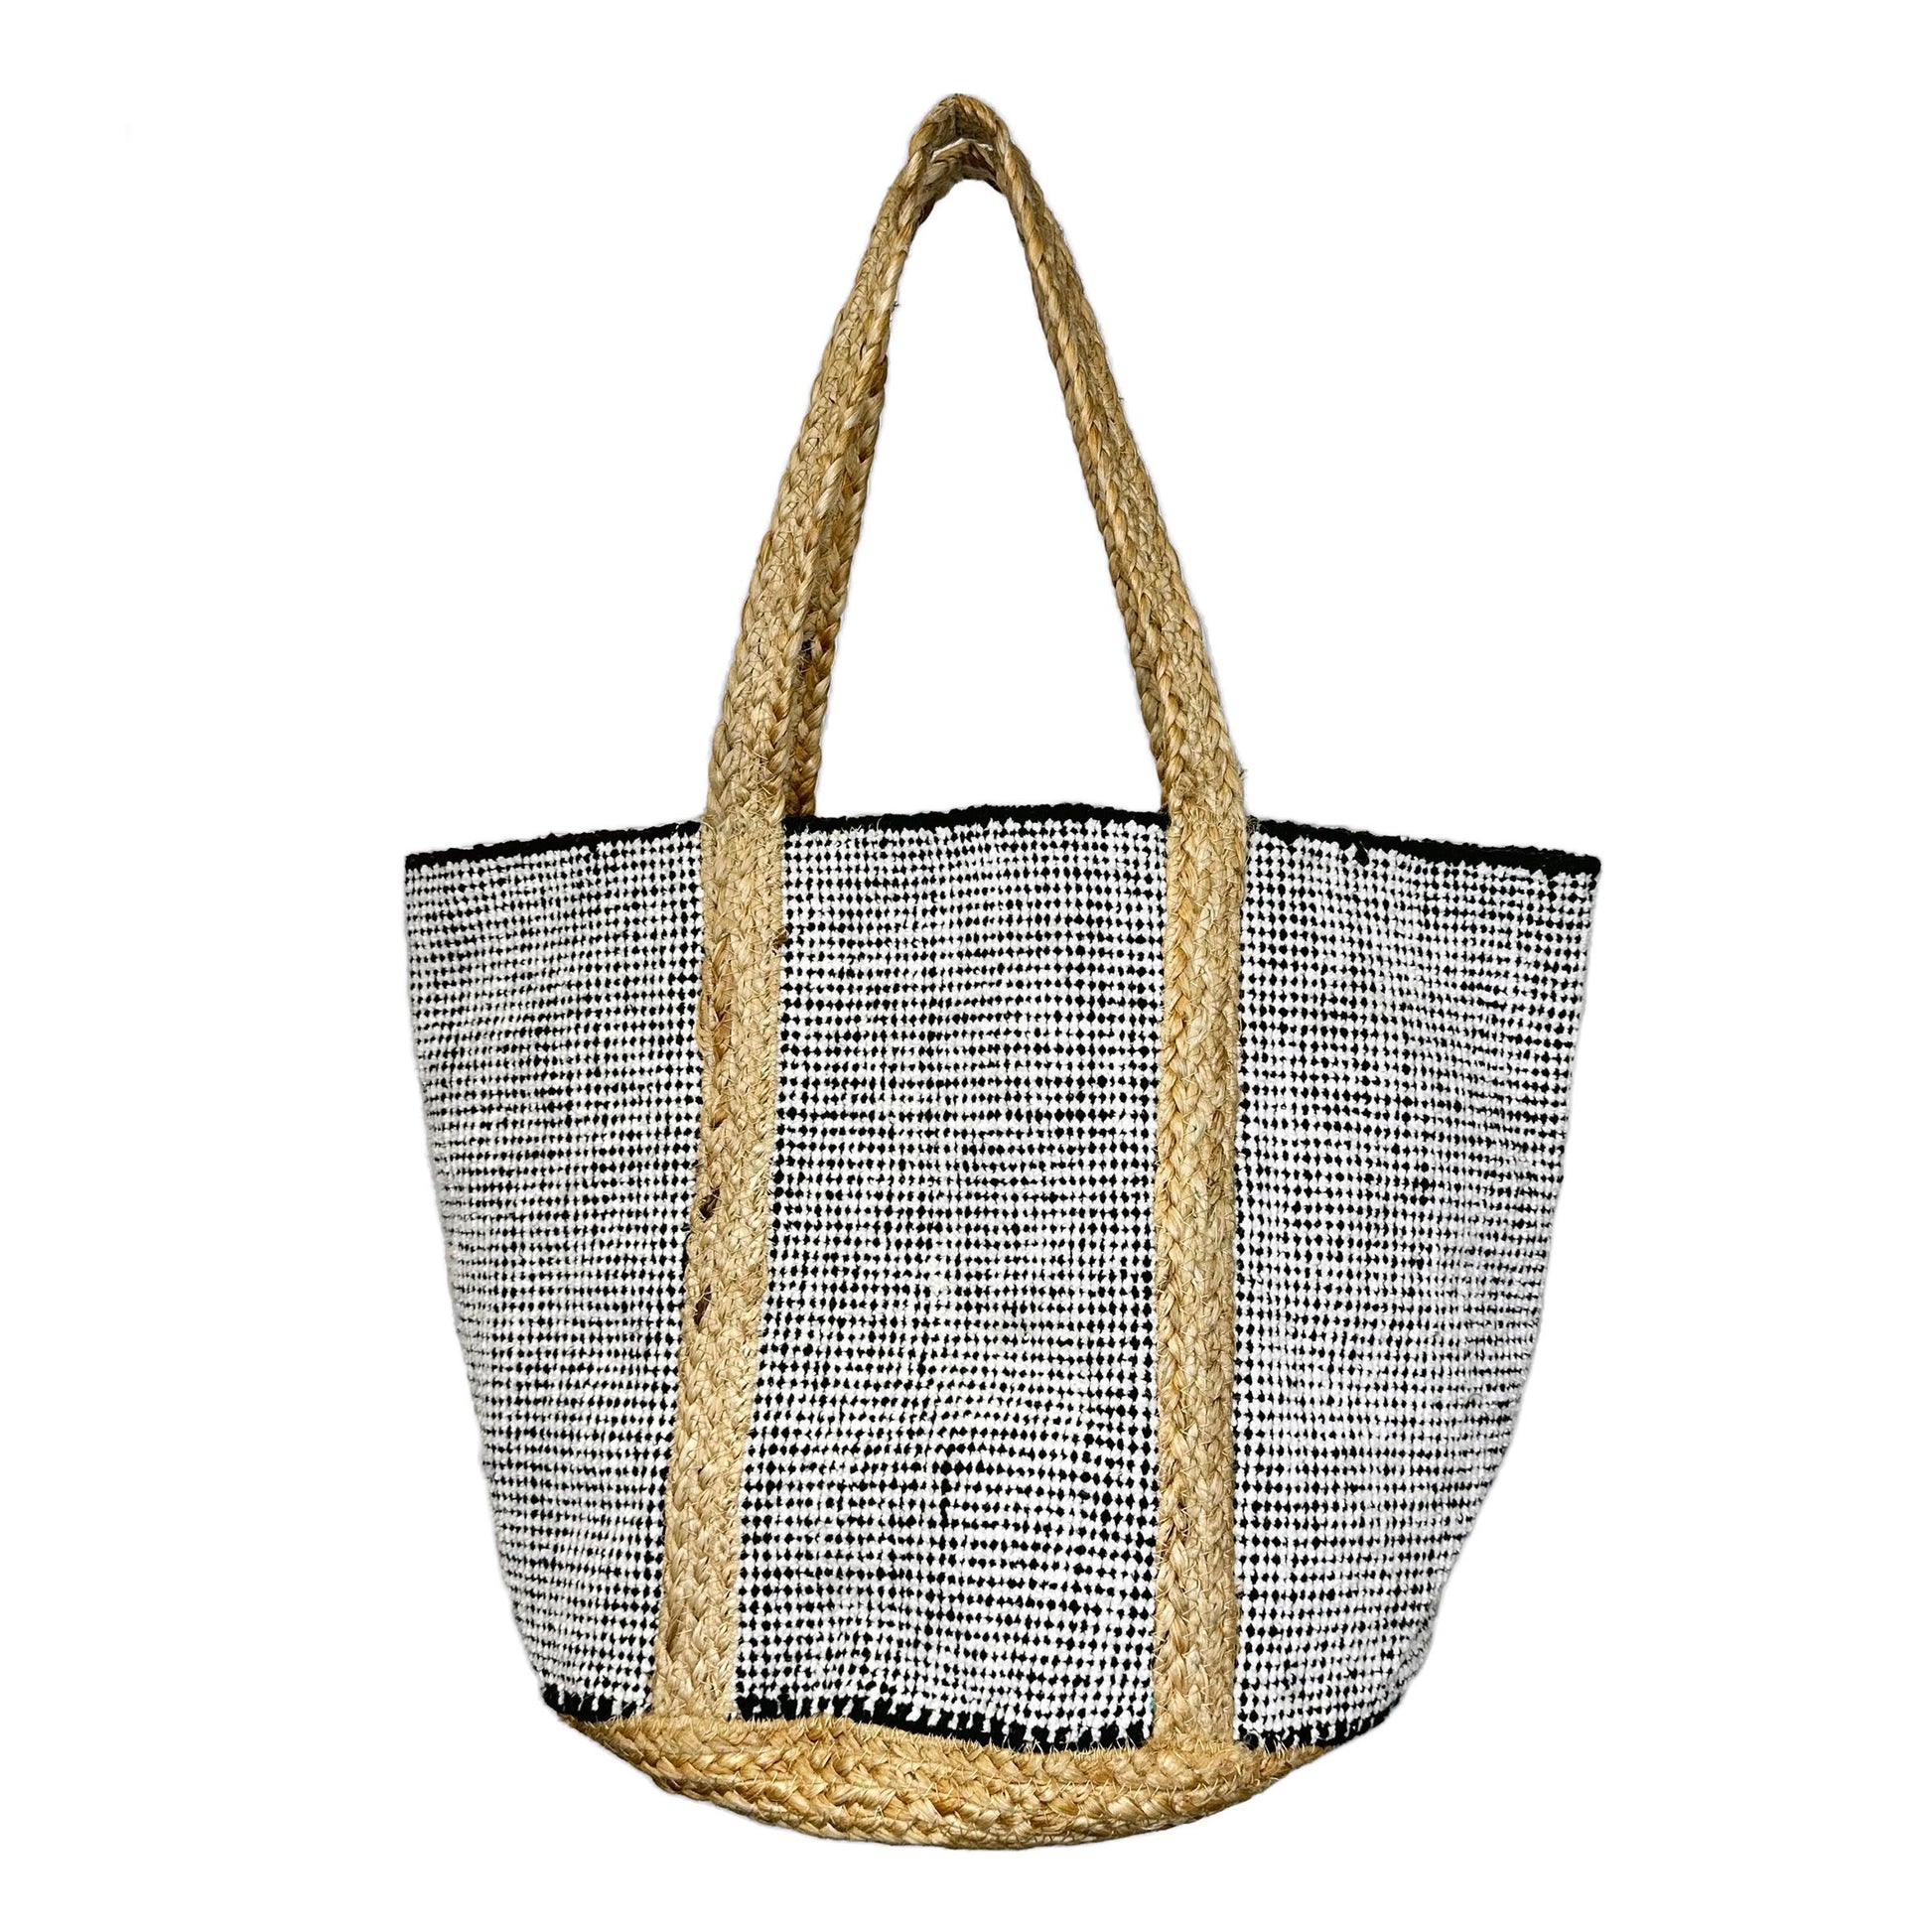 black and white cotton tote with jute base and handles.